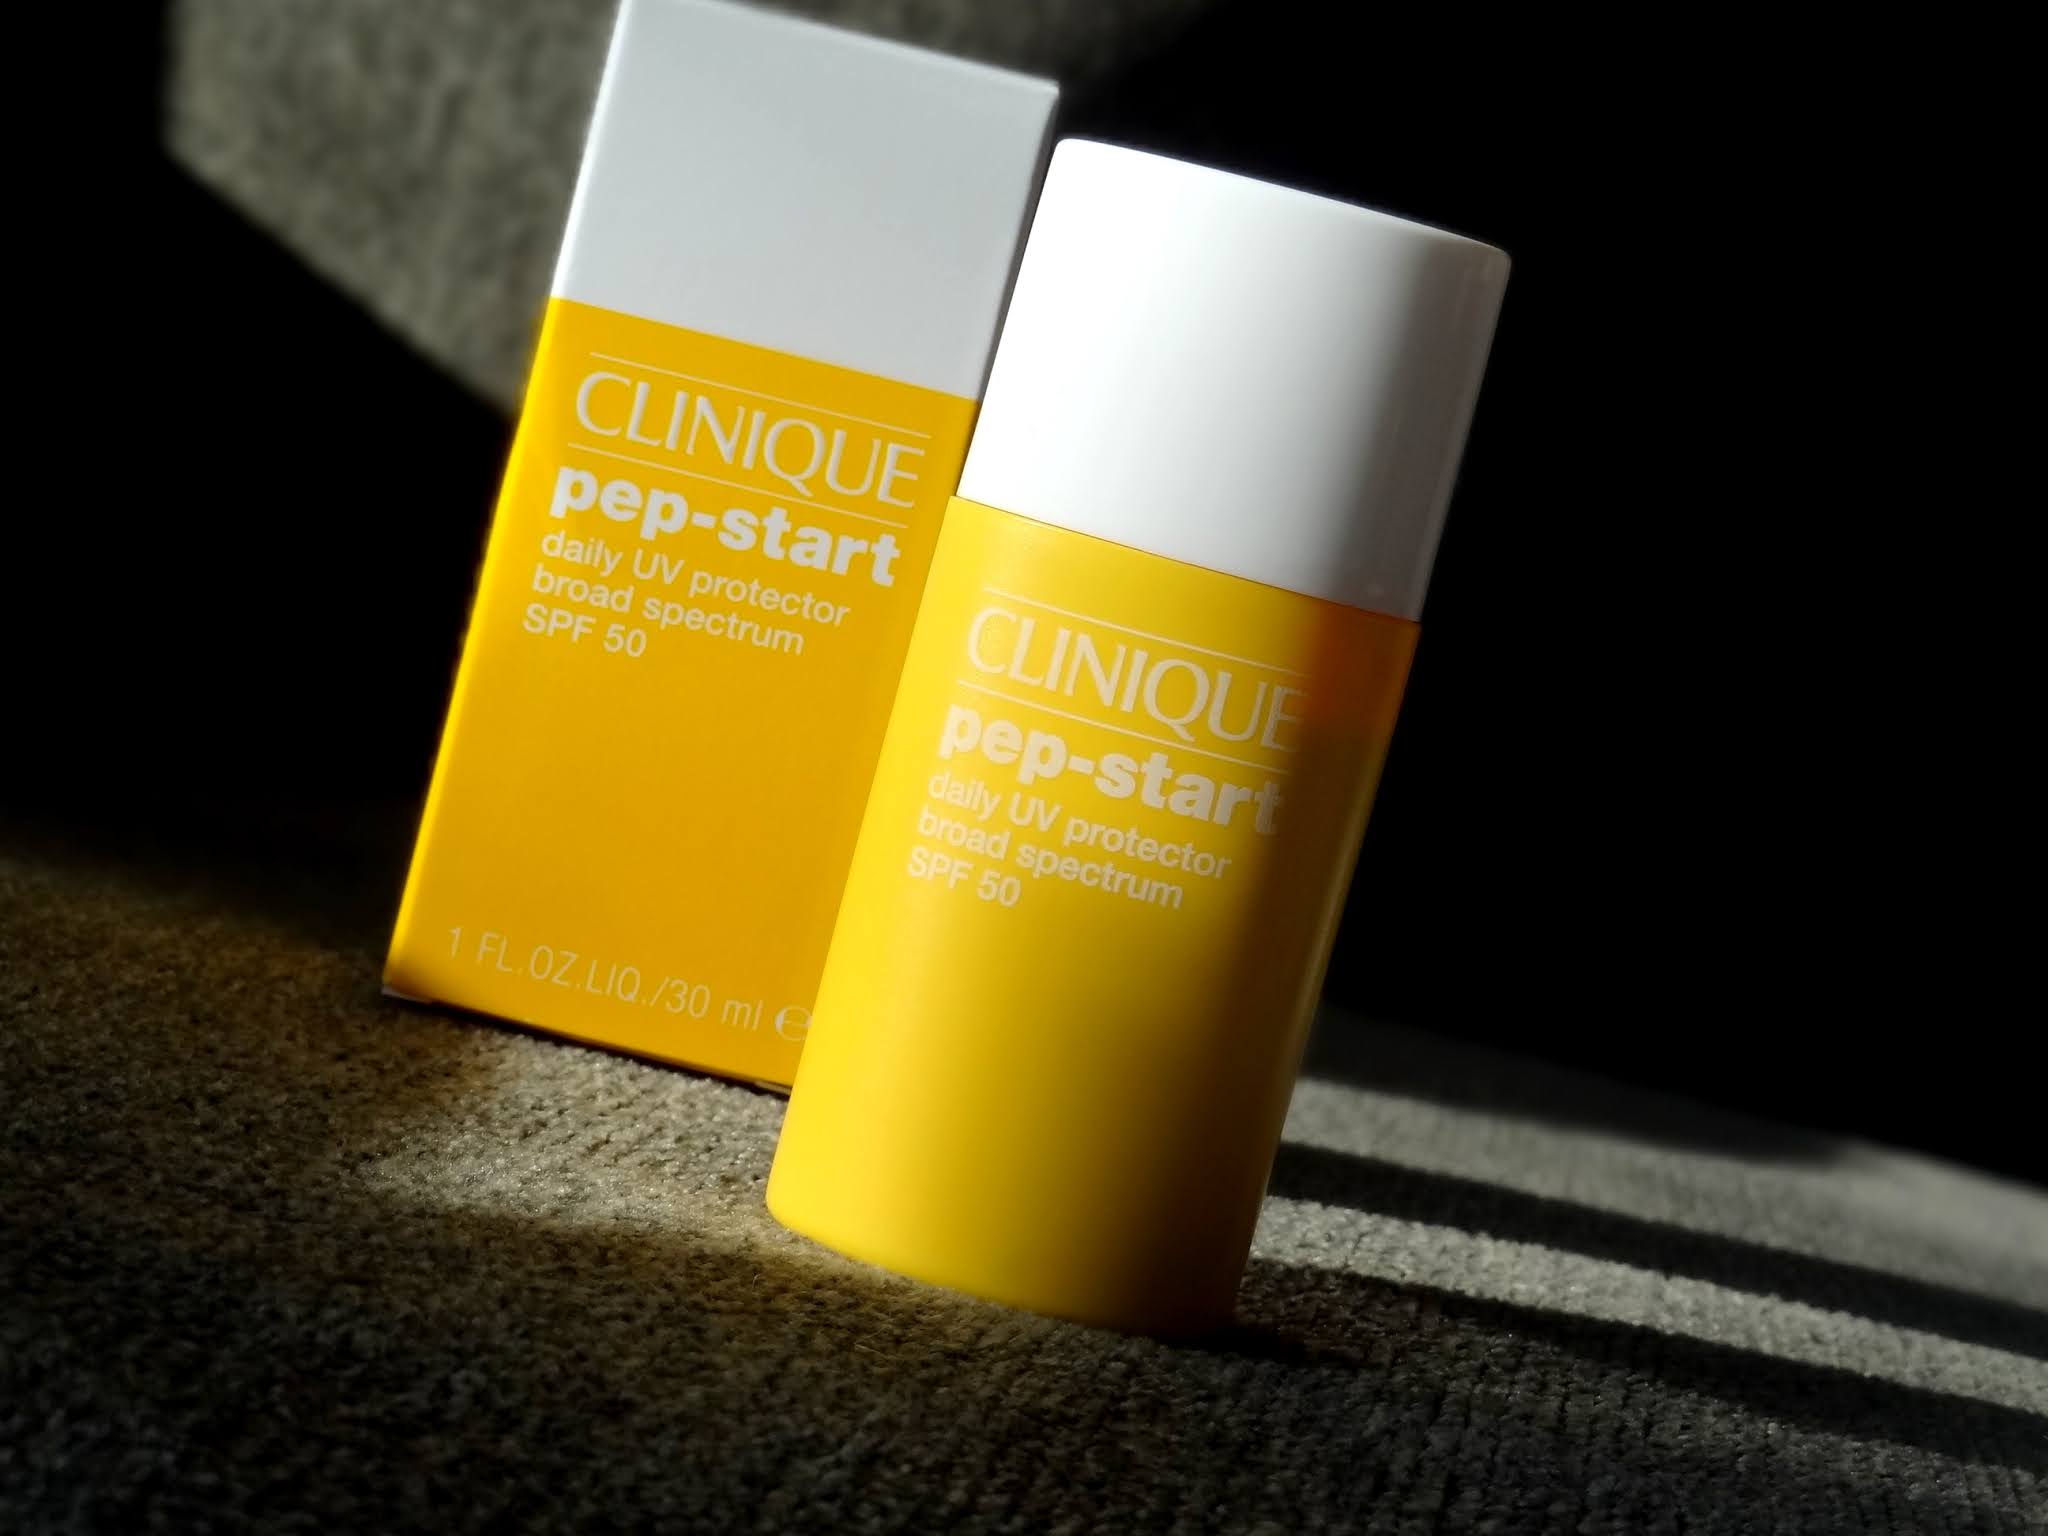 Daily start. Clinique Pep Star spf50. Beausta UV Protector suncream. Бодиани BEAUDIANI UV Protector СС отзывы.